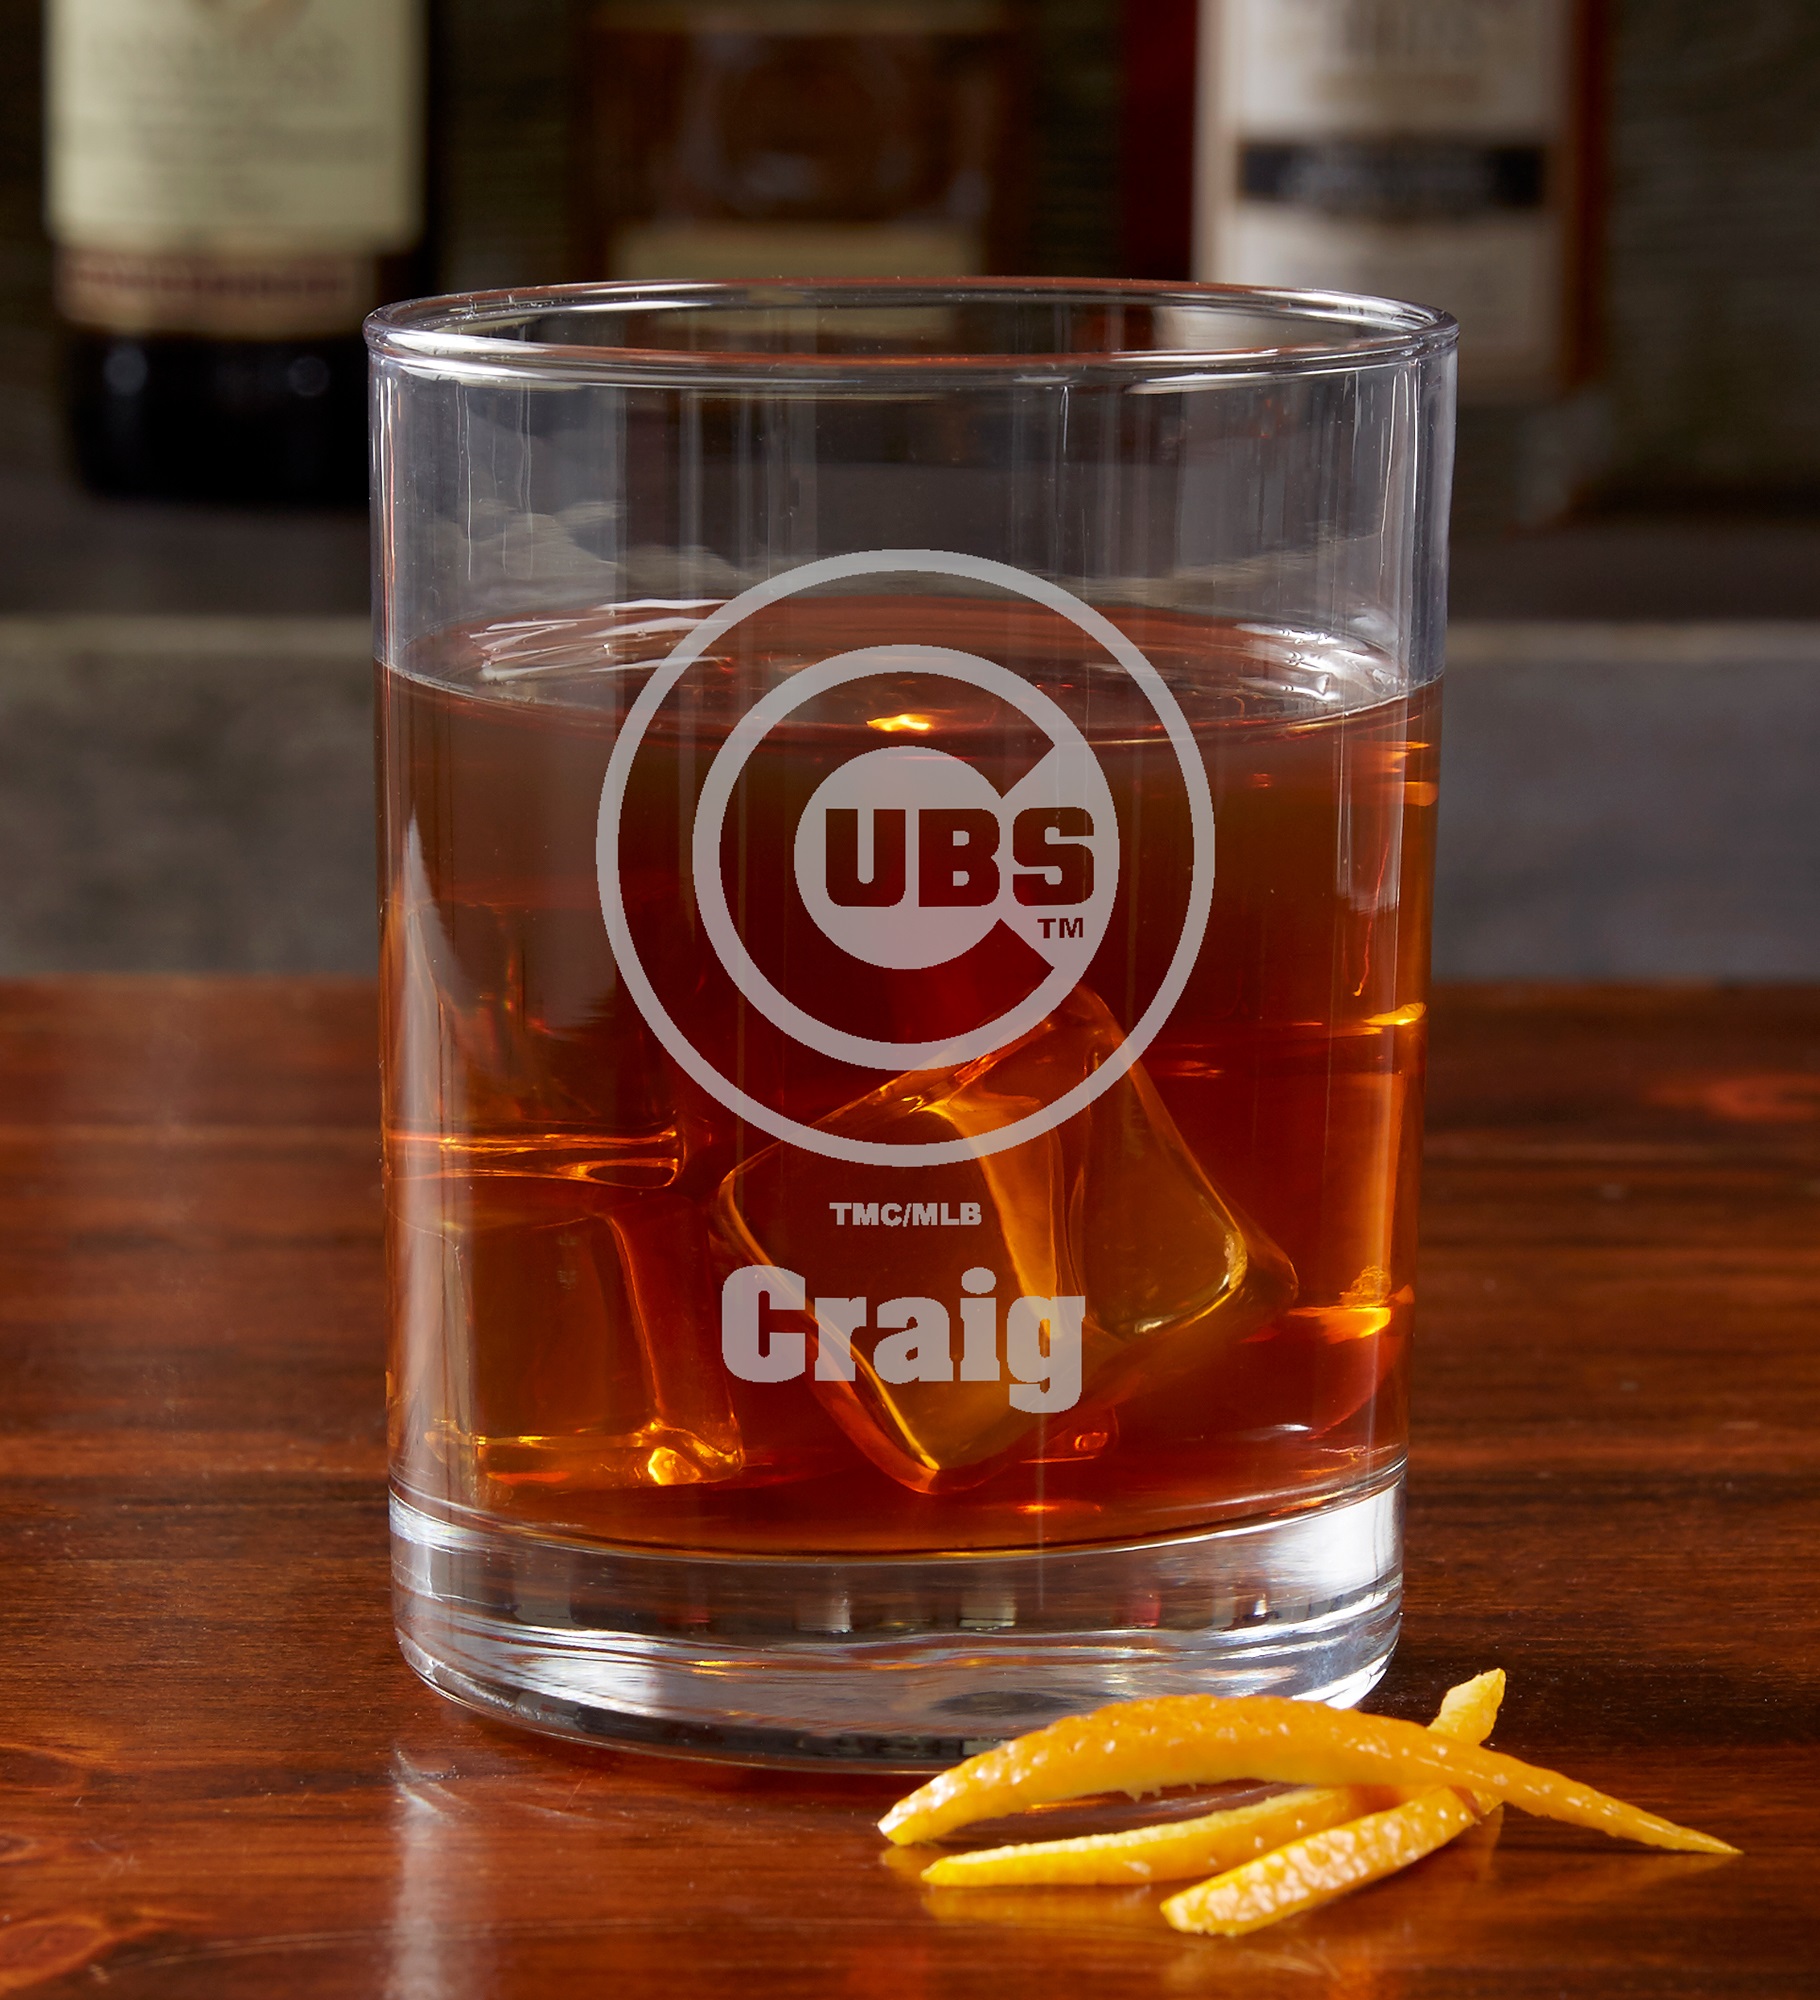 MLB St. Chicago Cubs Engraved Old Fashioned Whiskey Glasses